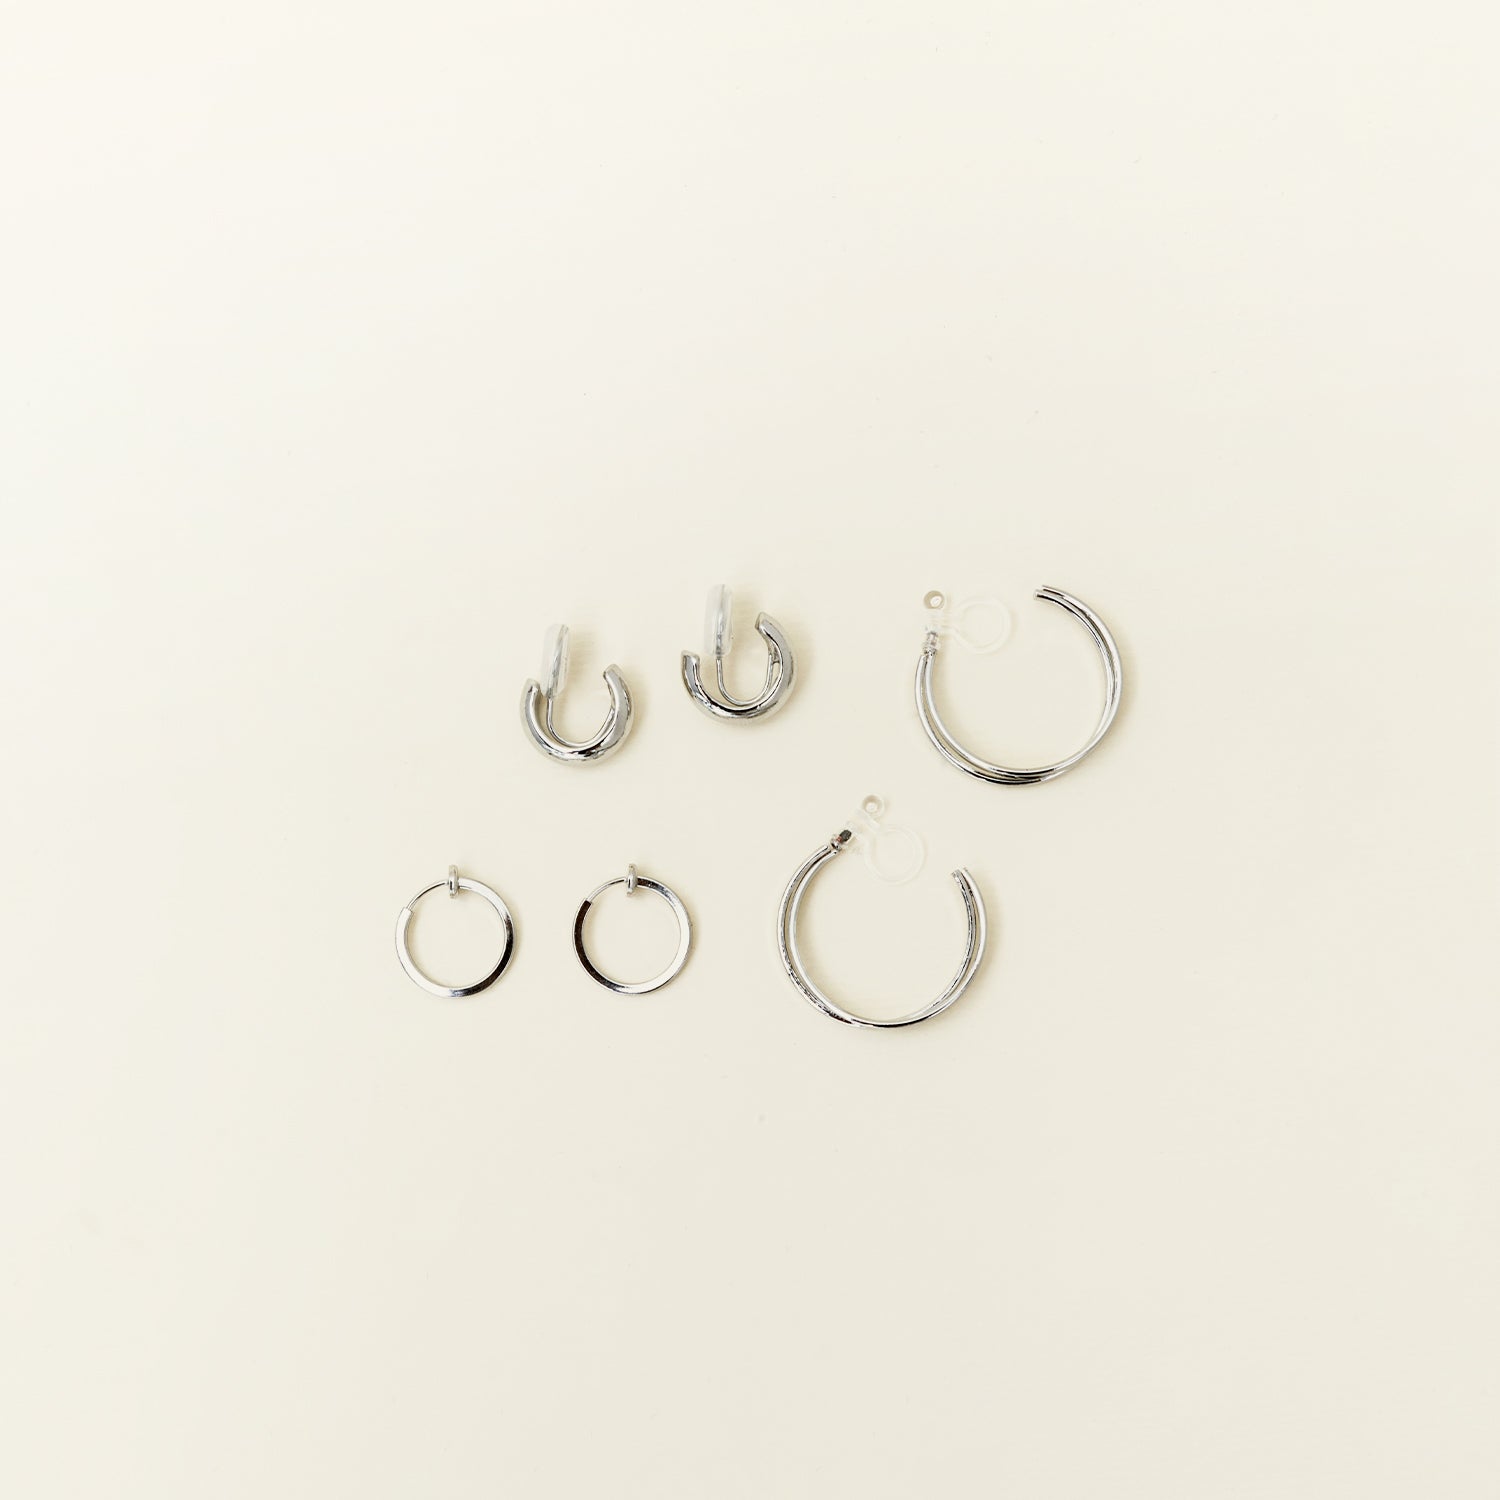 Image of the Everyday Essentials Set features three closure types: invisible resin, sliding spring and mosquito coil. It includes a Simple Silver Huggie Clip-On, Mini Hoop Earrings and Silver Cassie Hoop Earrings. Crafted from copper alloy, stainless steel and silver tone metal alloy, this item comes with three pairs and is also available in Gold.